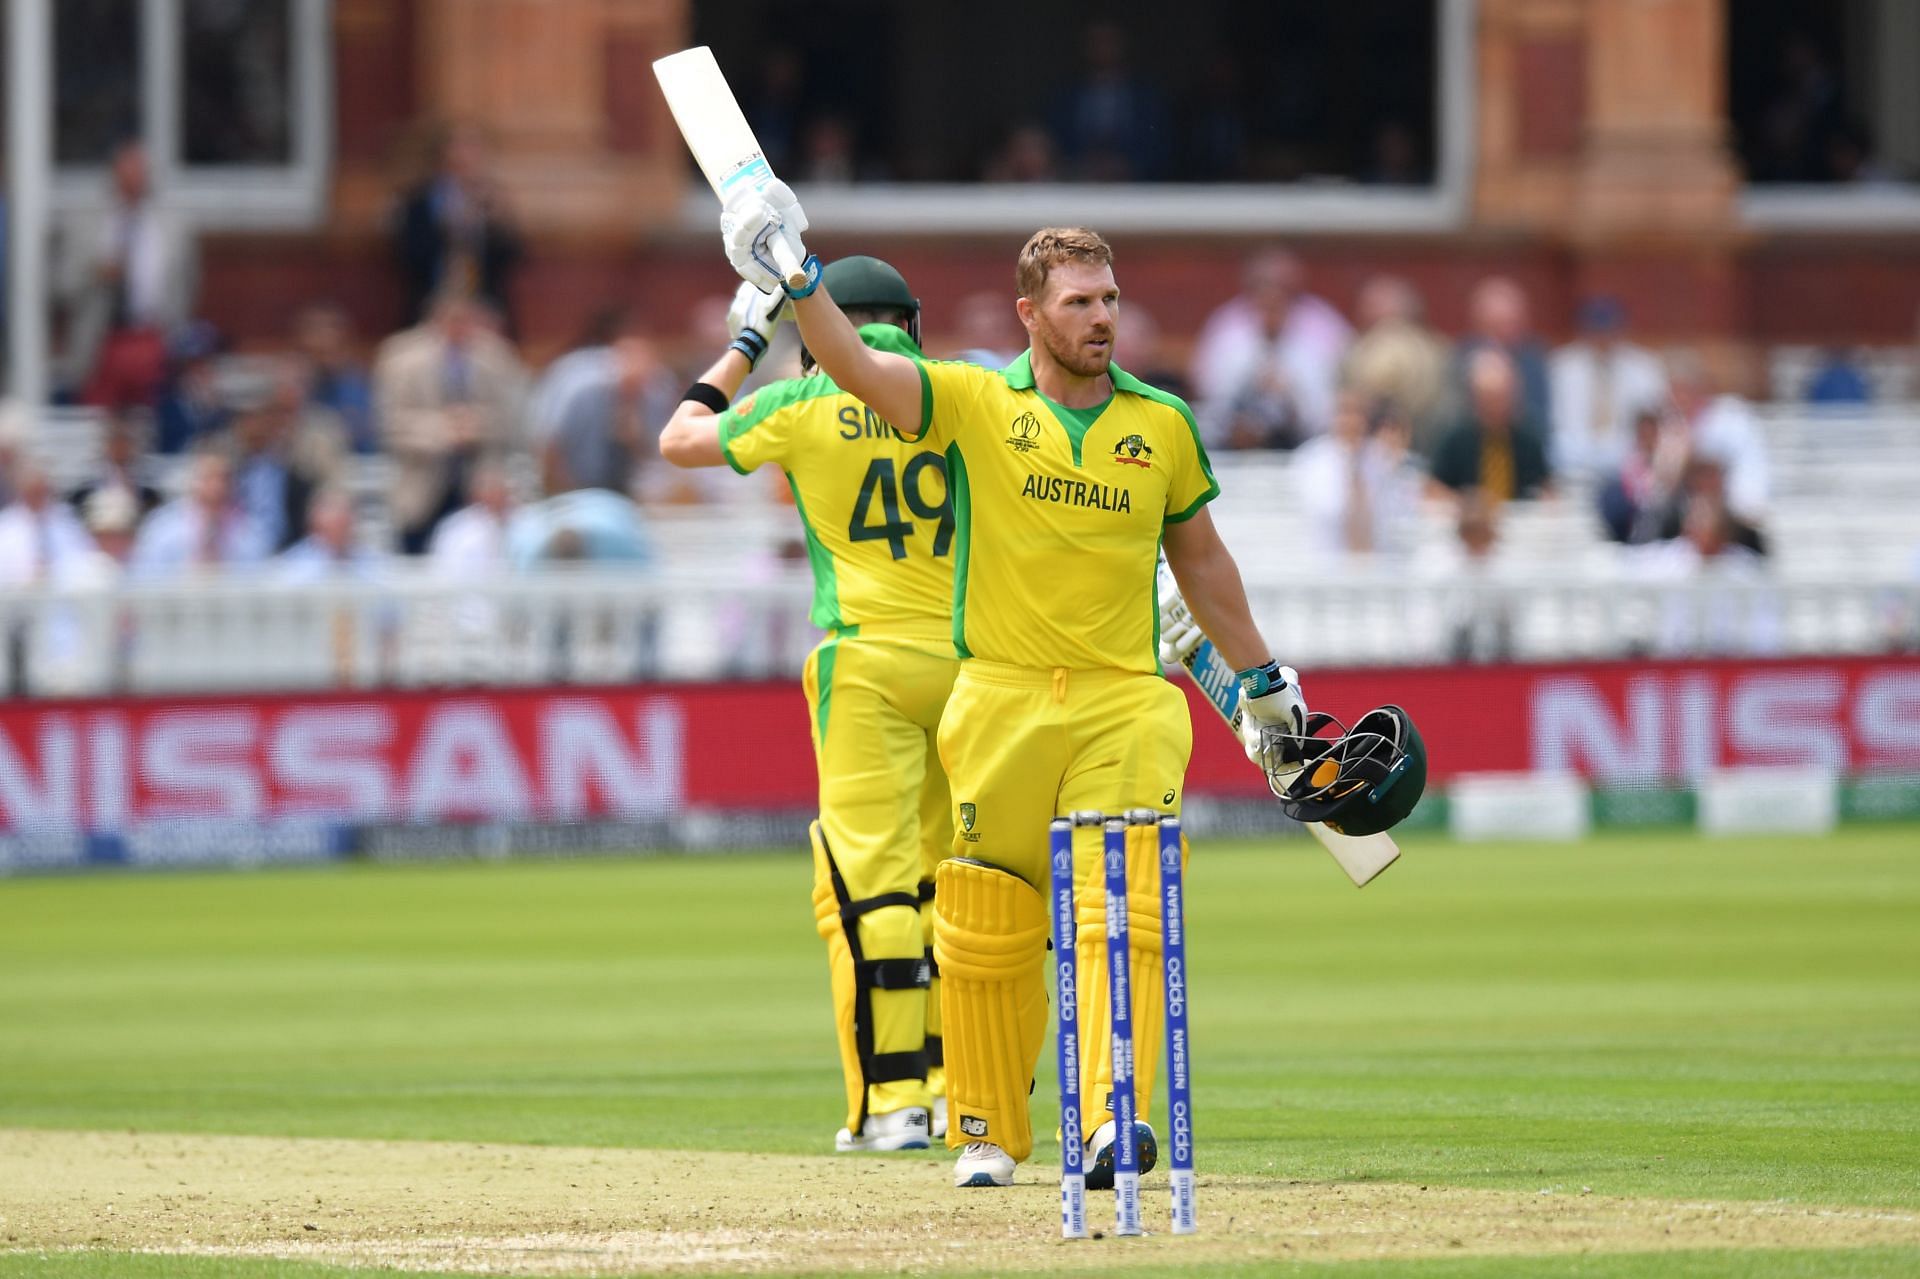 Finch, along with Warner, formed a formidable opening pair